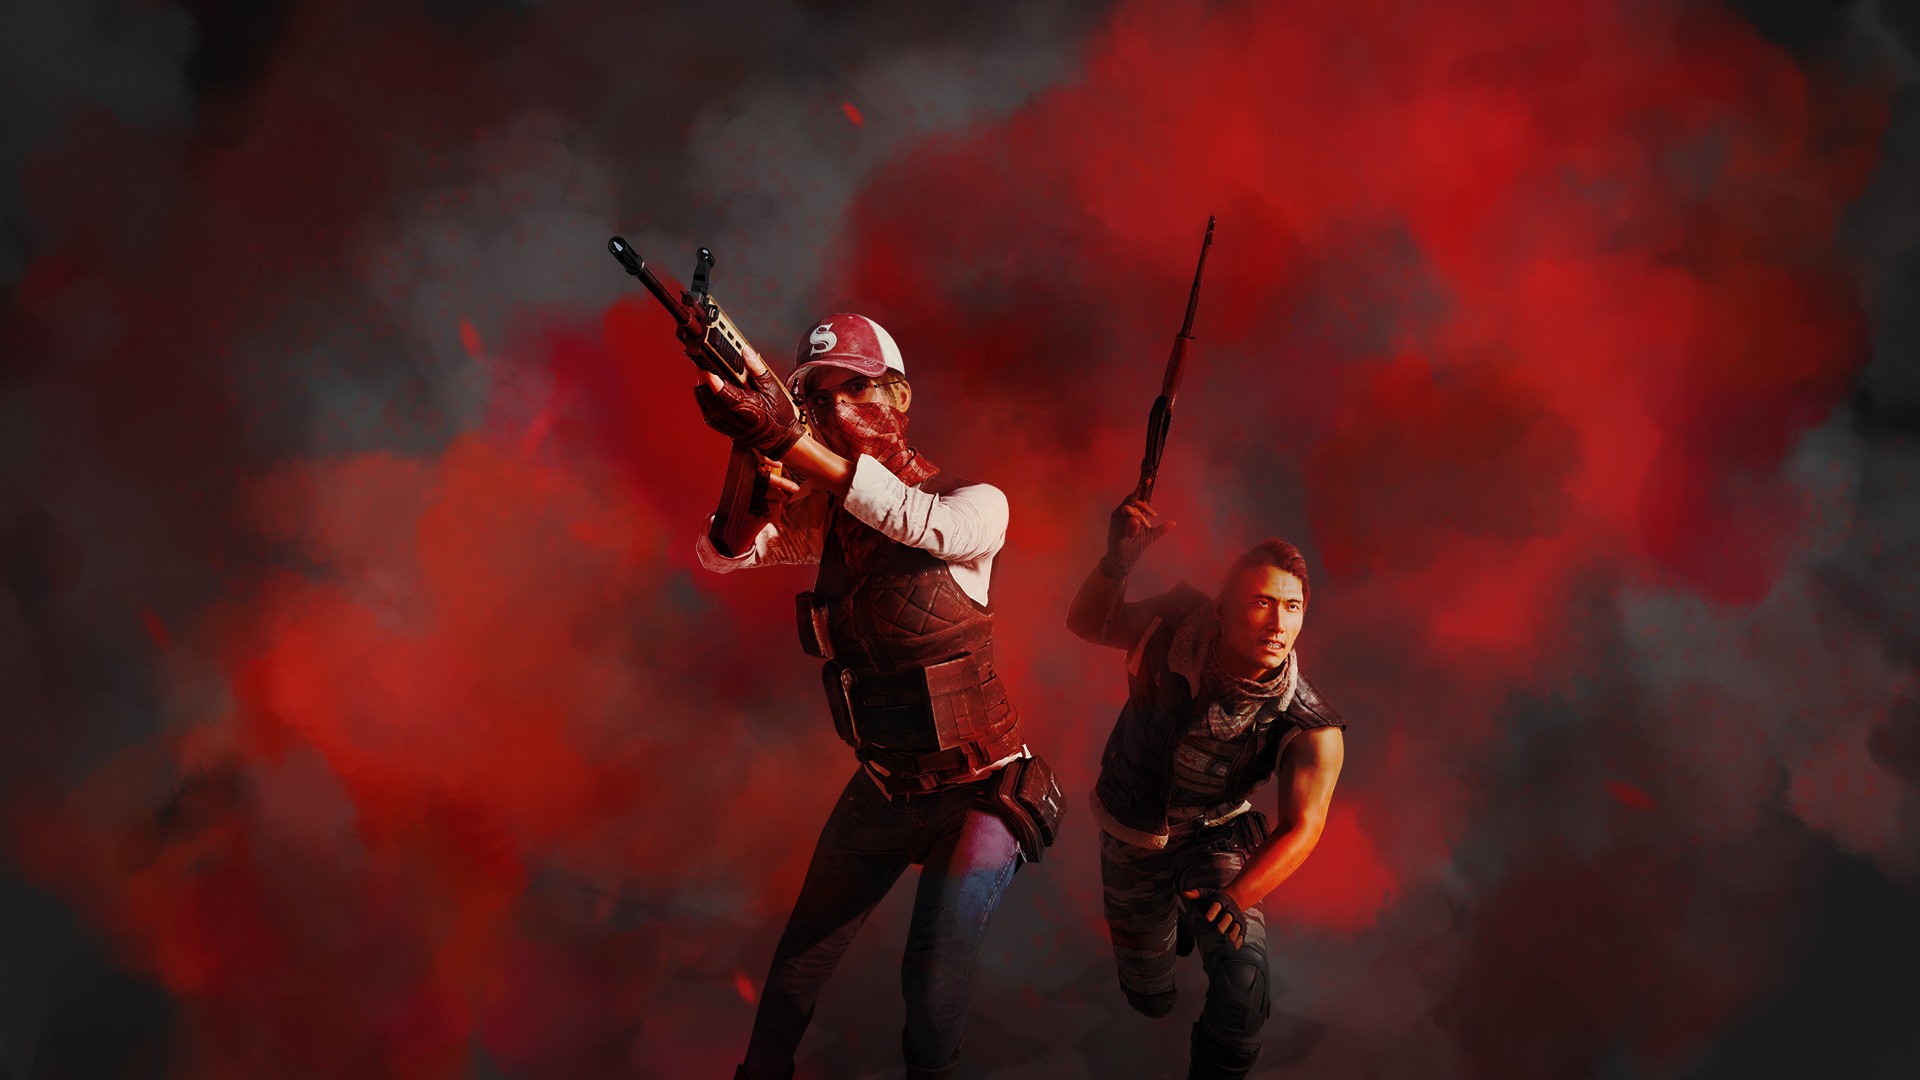 PUBG PC Wallpaper with image resolution 1920x1080 pixel. You can use this wallpaper as background for your desktop Computer Screensavers, Android or iPhone smartphones